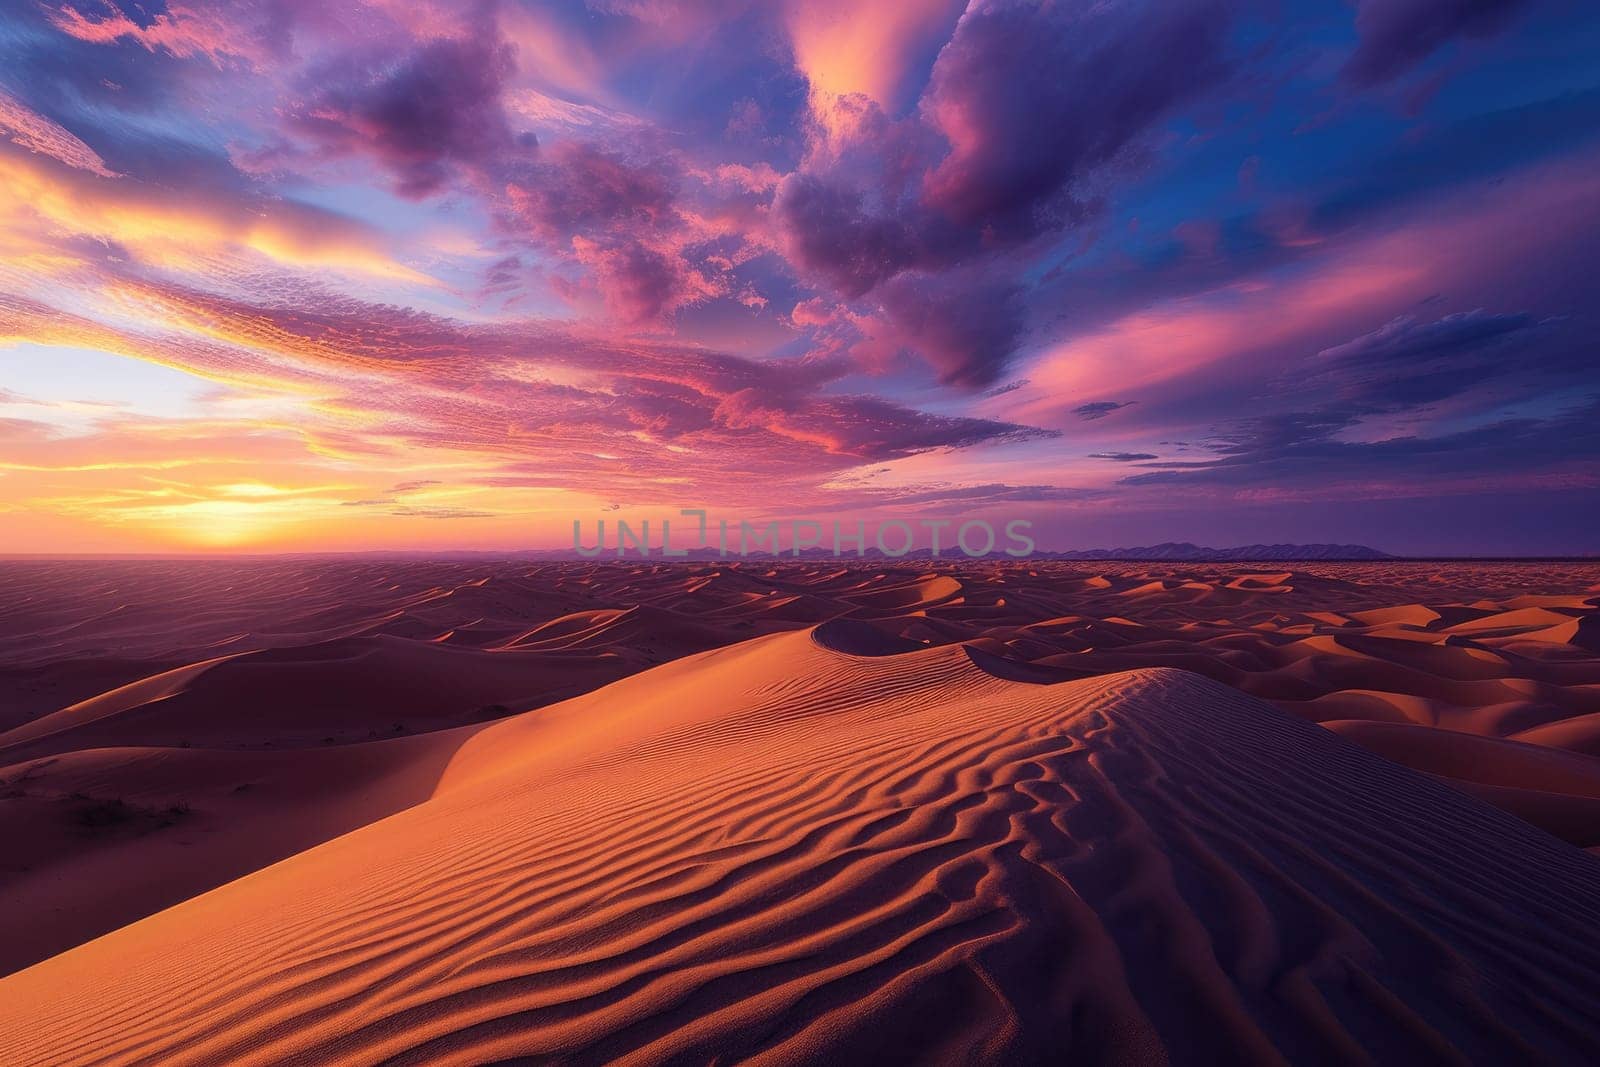 An expansive desert landscape at sunset, vivid colors in the sky, dunes creating patterns, portraying the beauty of wilderness. Resplendent.